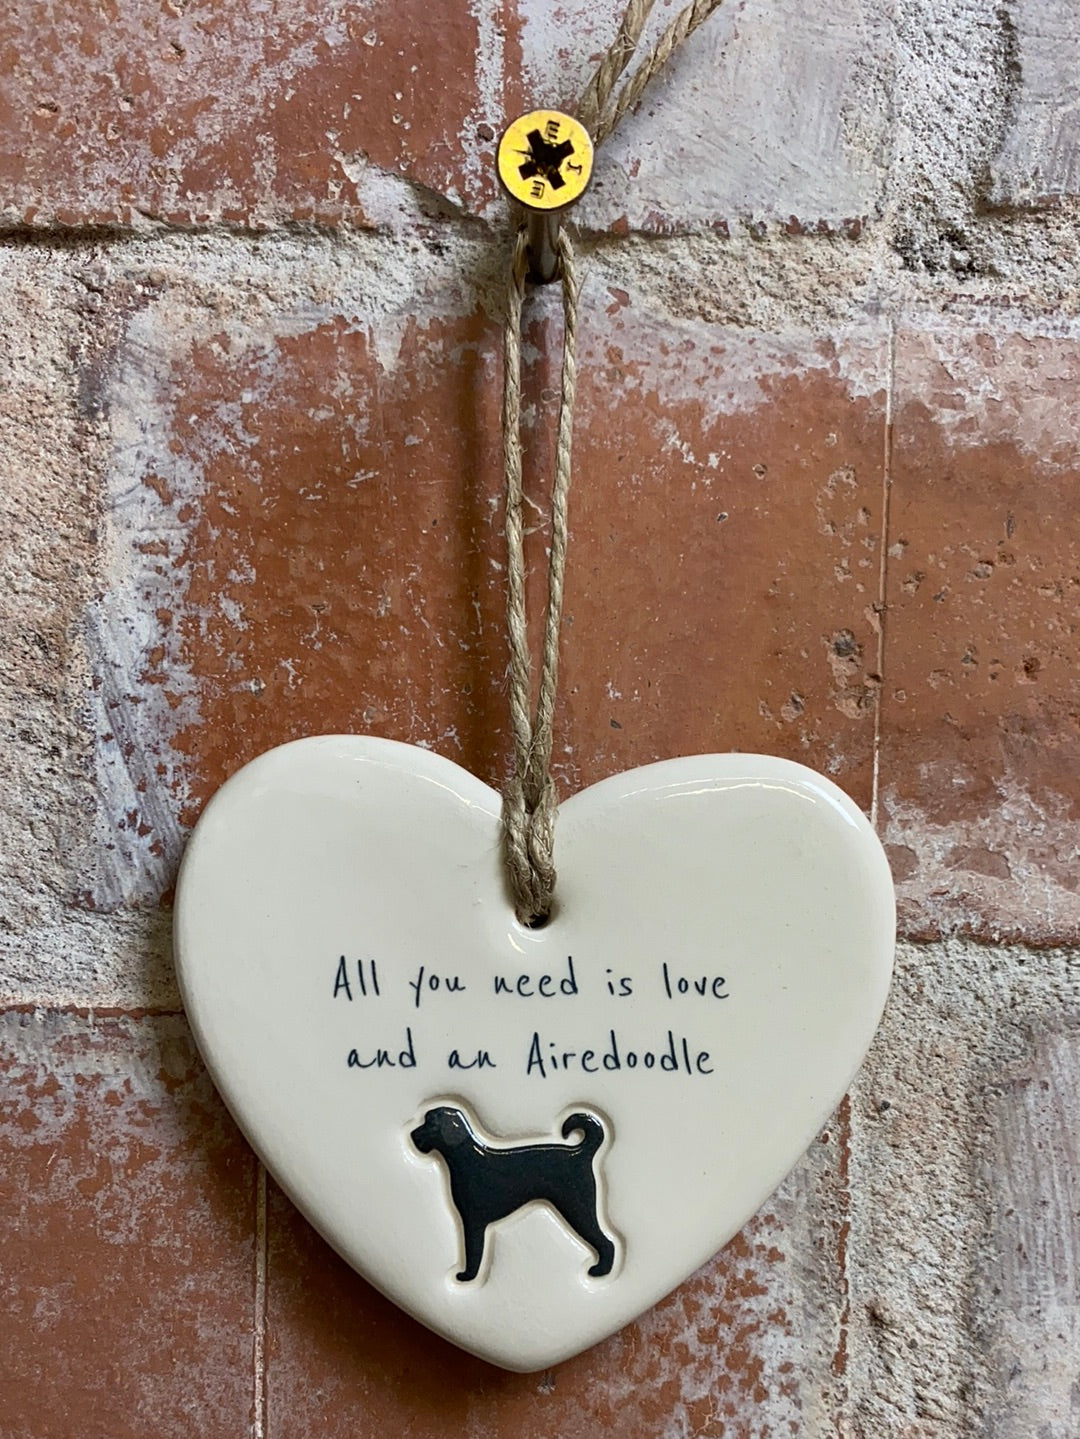 Airedoodle ceramic heart